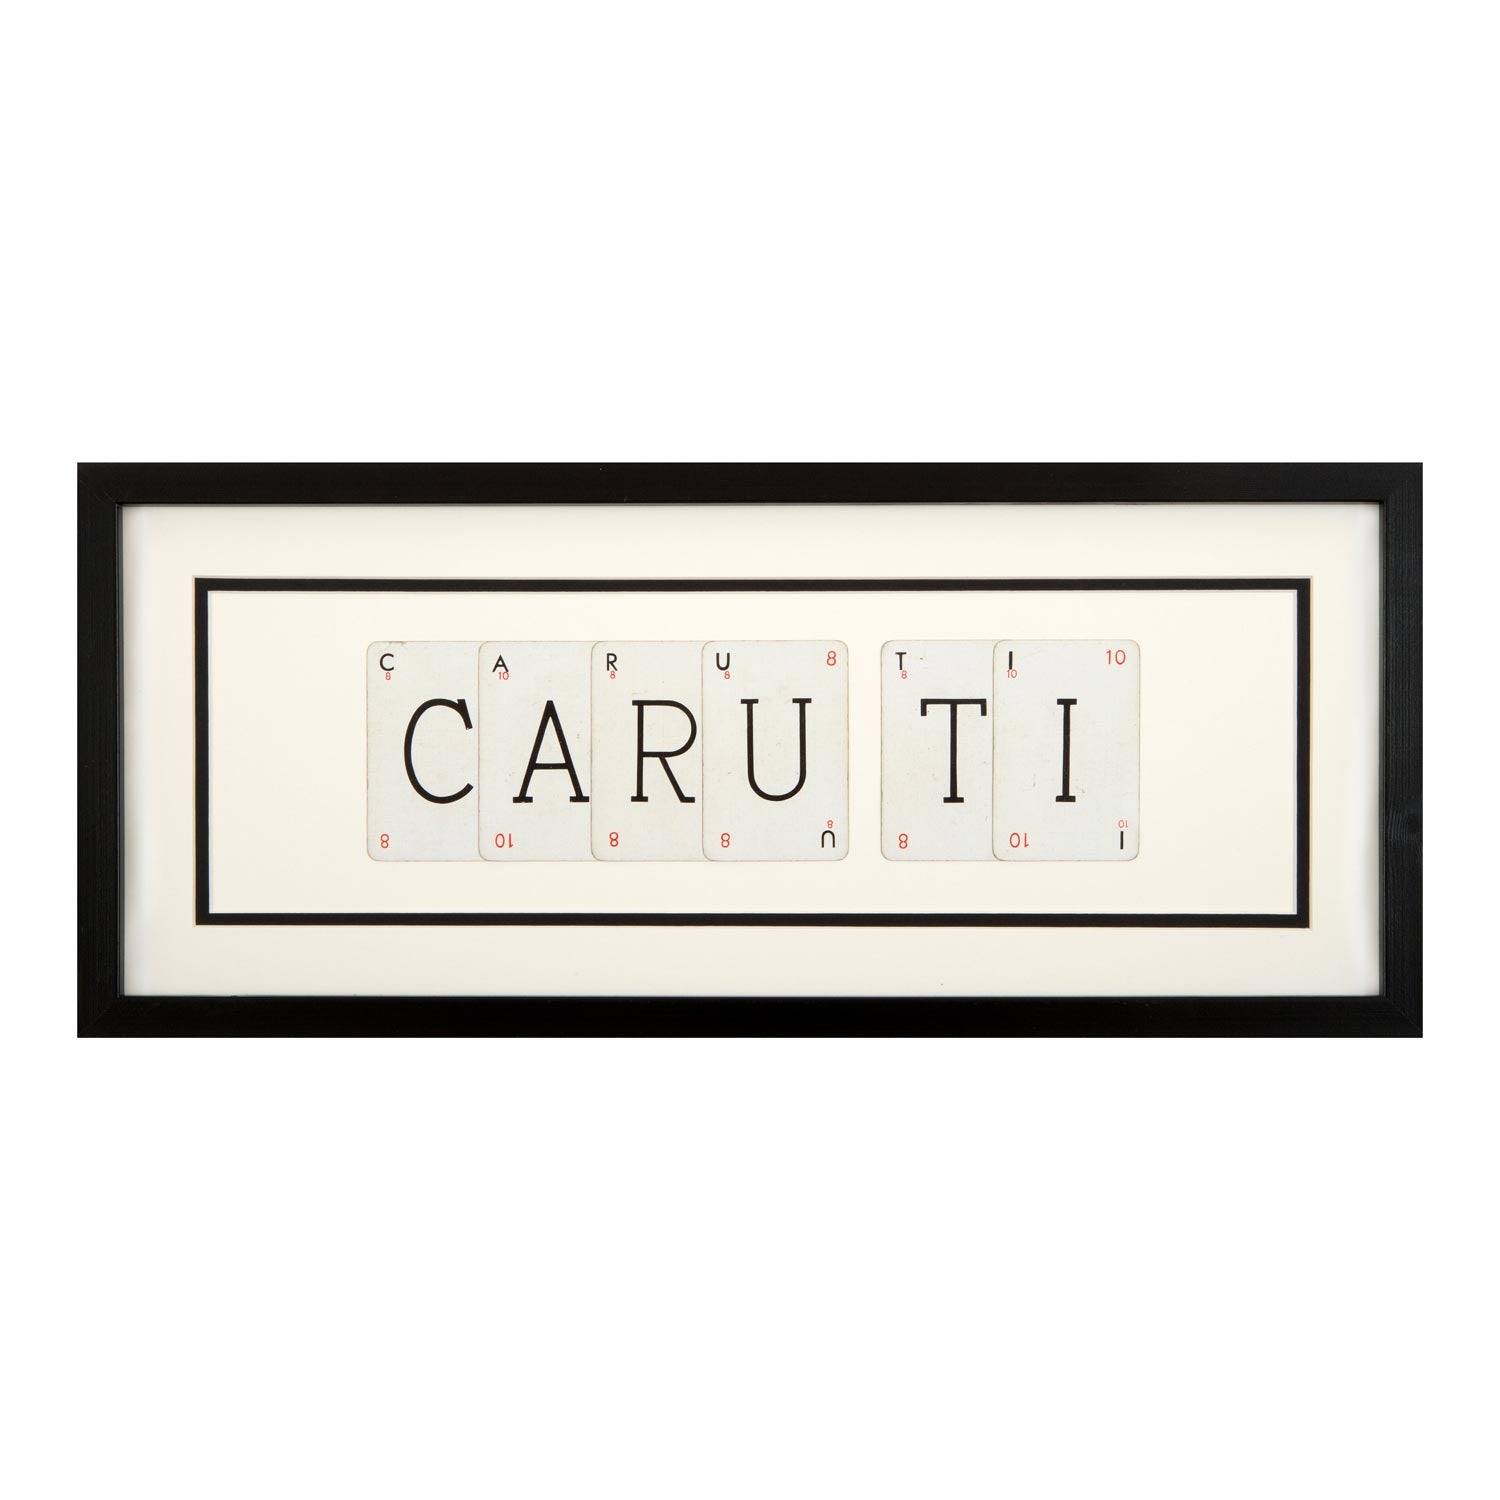 Picture - Vintage Playing Cards - Caru Ti / Love You